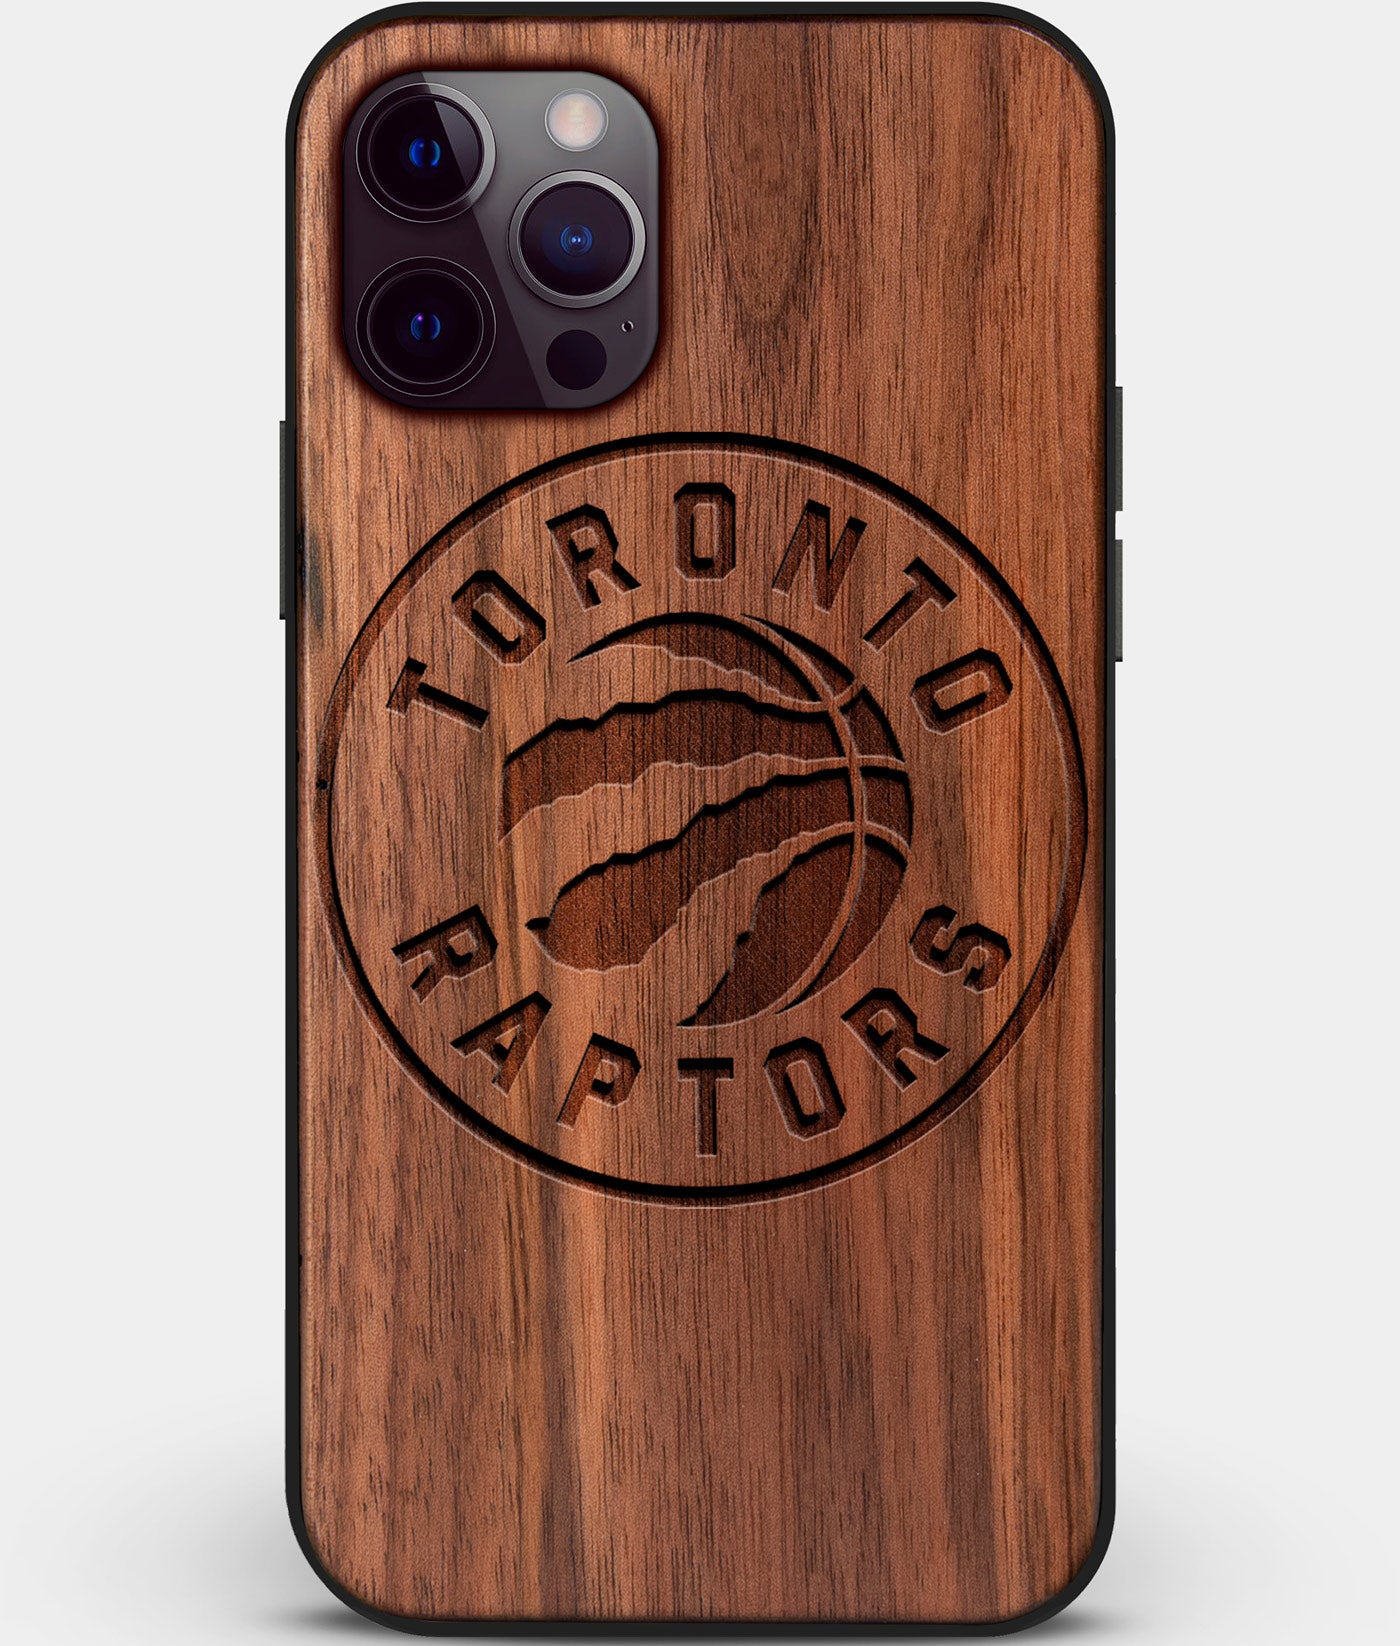 Custom Carved Wood Toronto Raptors iPhone 12 Pro Max Case | Personalized Walnut Wood Toronto Raptors Cover, Birthday Gift, Gifts For Him, Monogrammed Gift For Fan | by Engraved In Nature